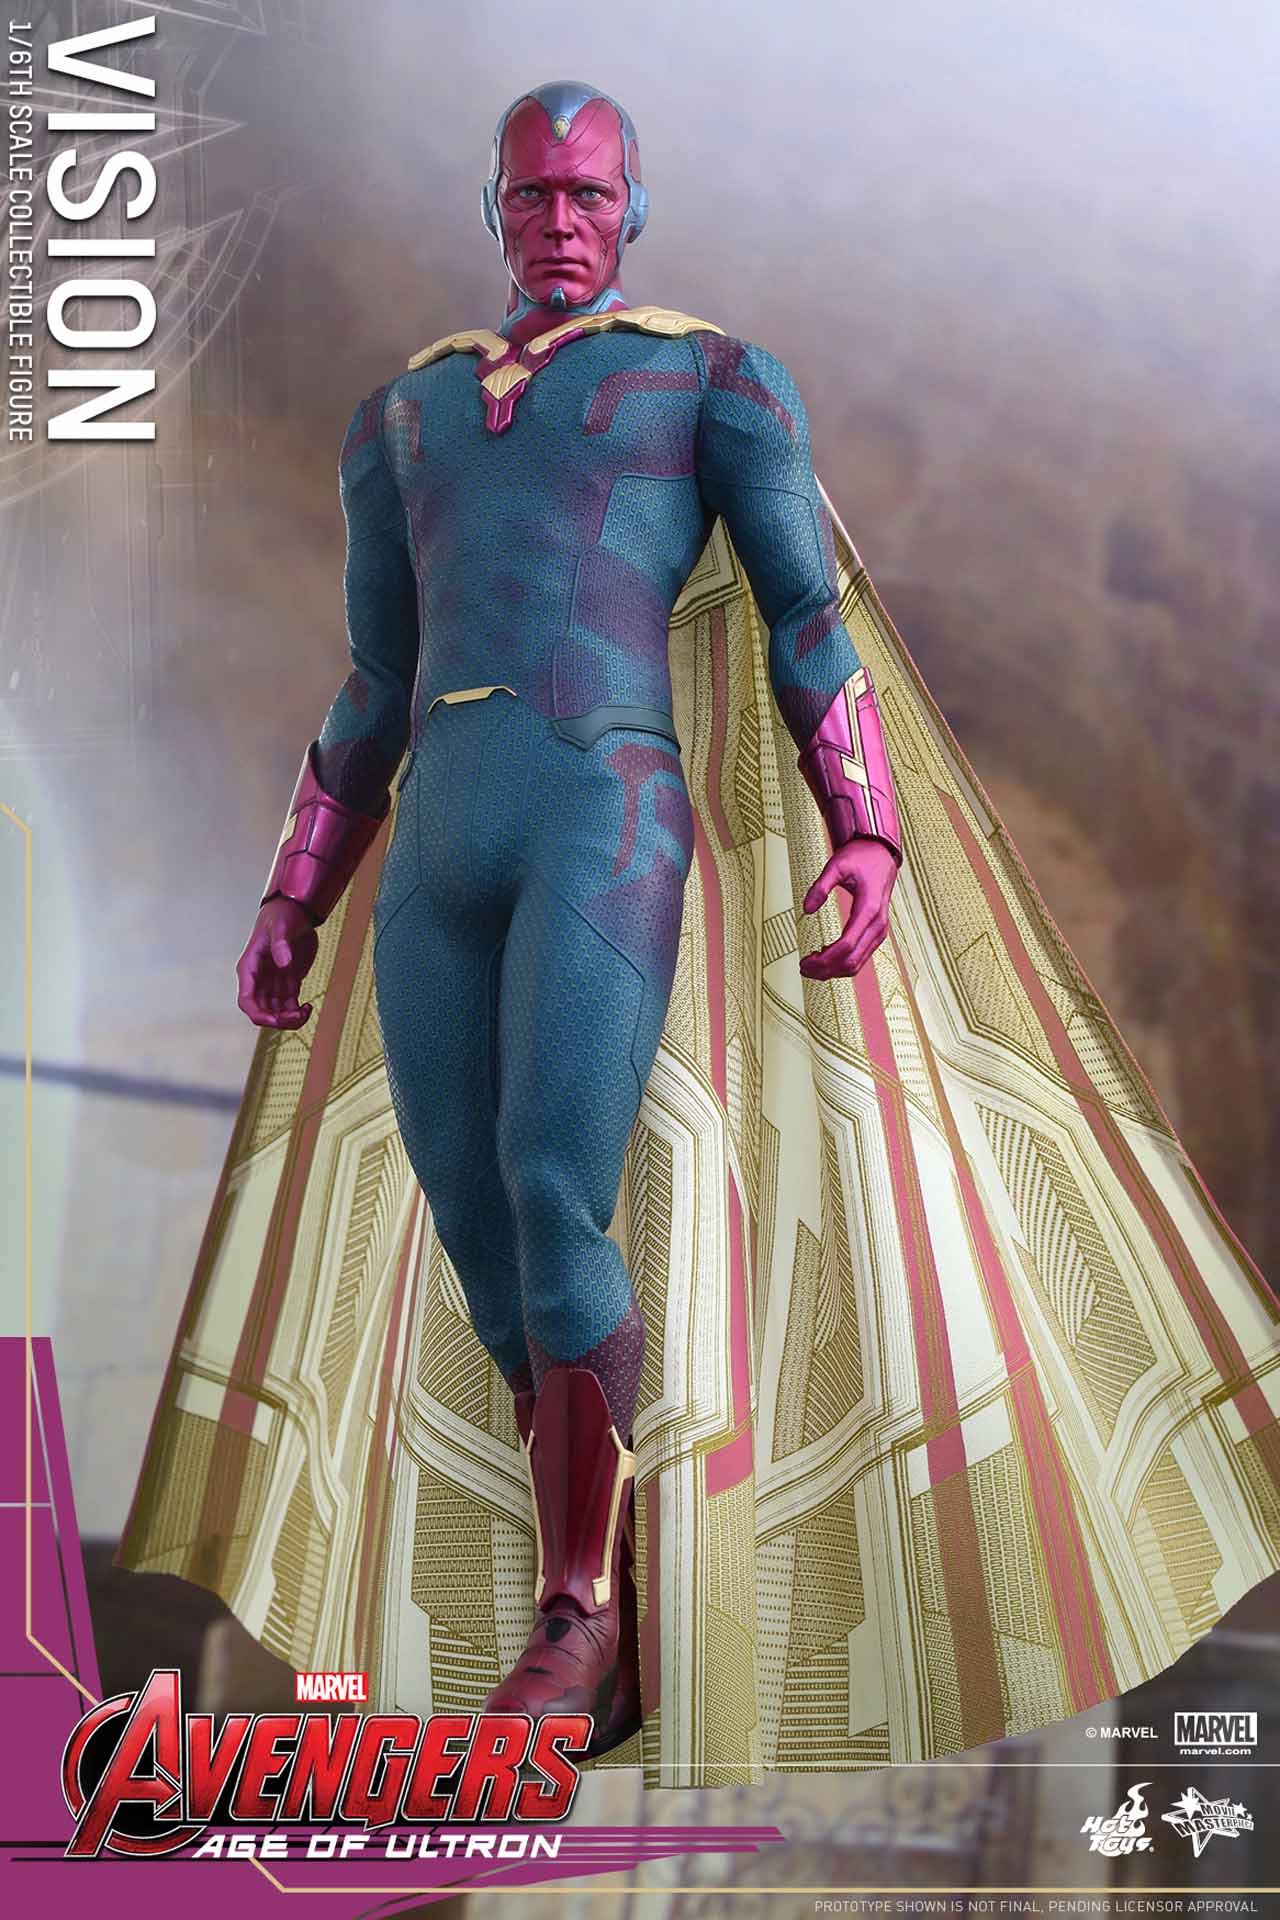 1/6th Scale Hot Toys Vision Collectible Figure